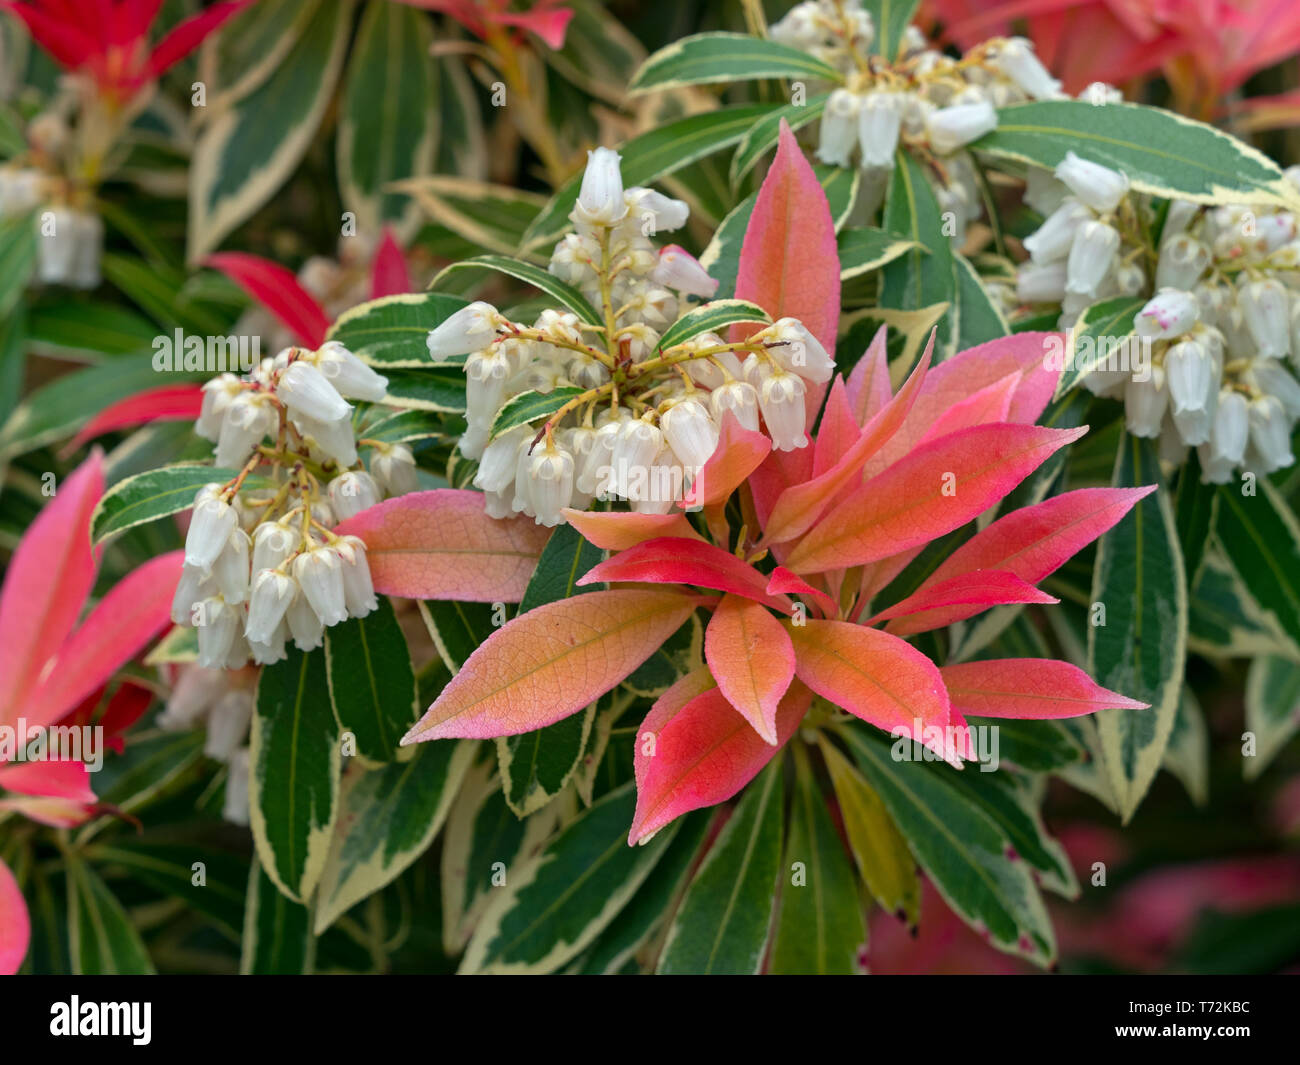 Japanese andromeda Pieris japonica 'Forest Flame'. Stock Photo